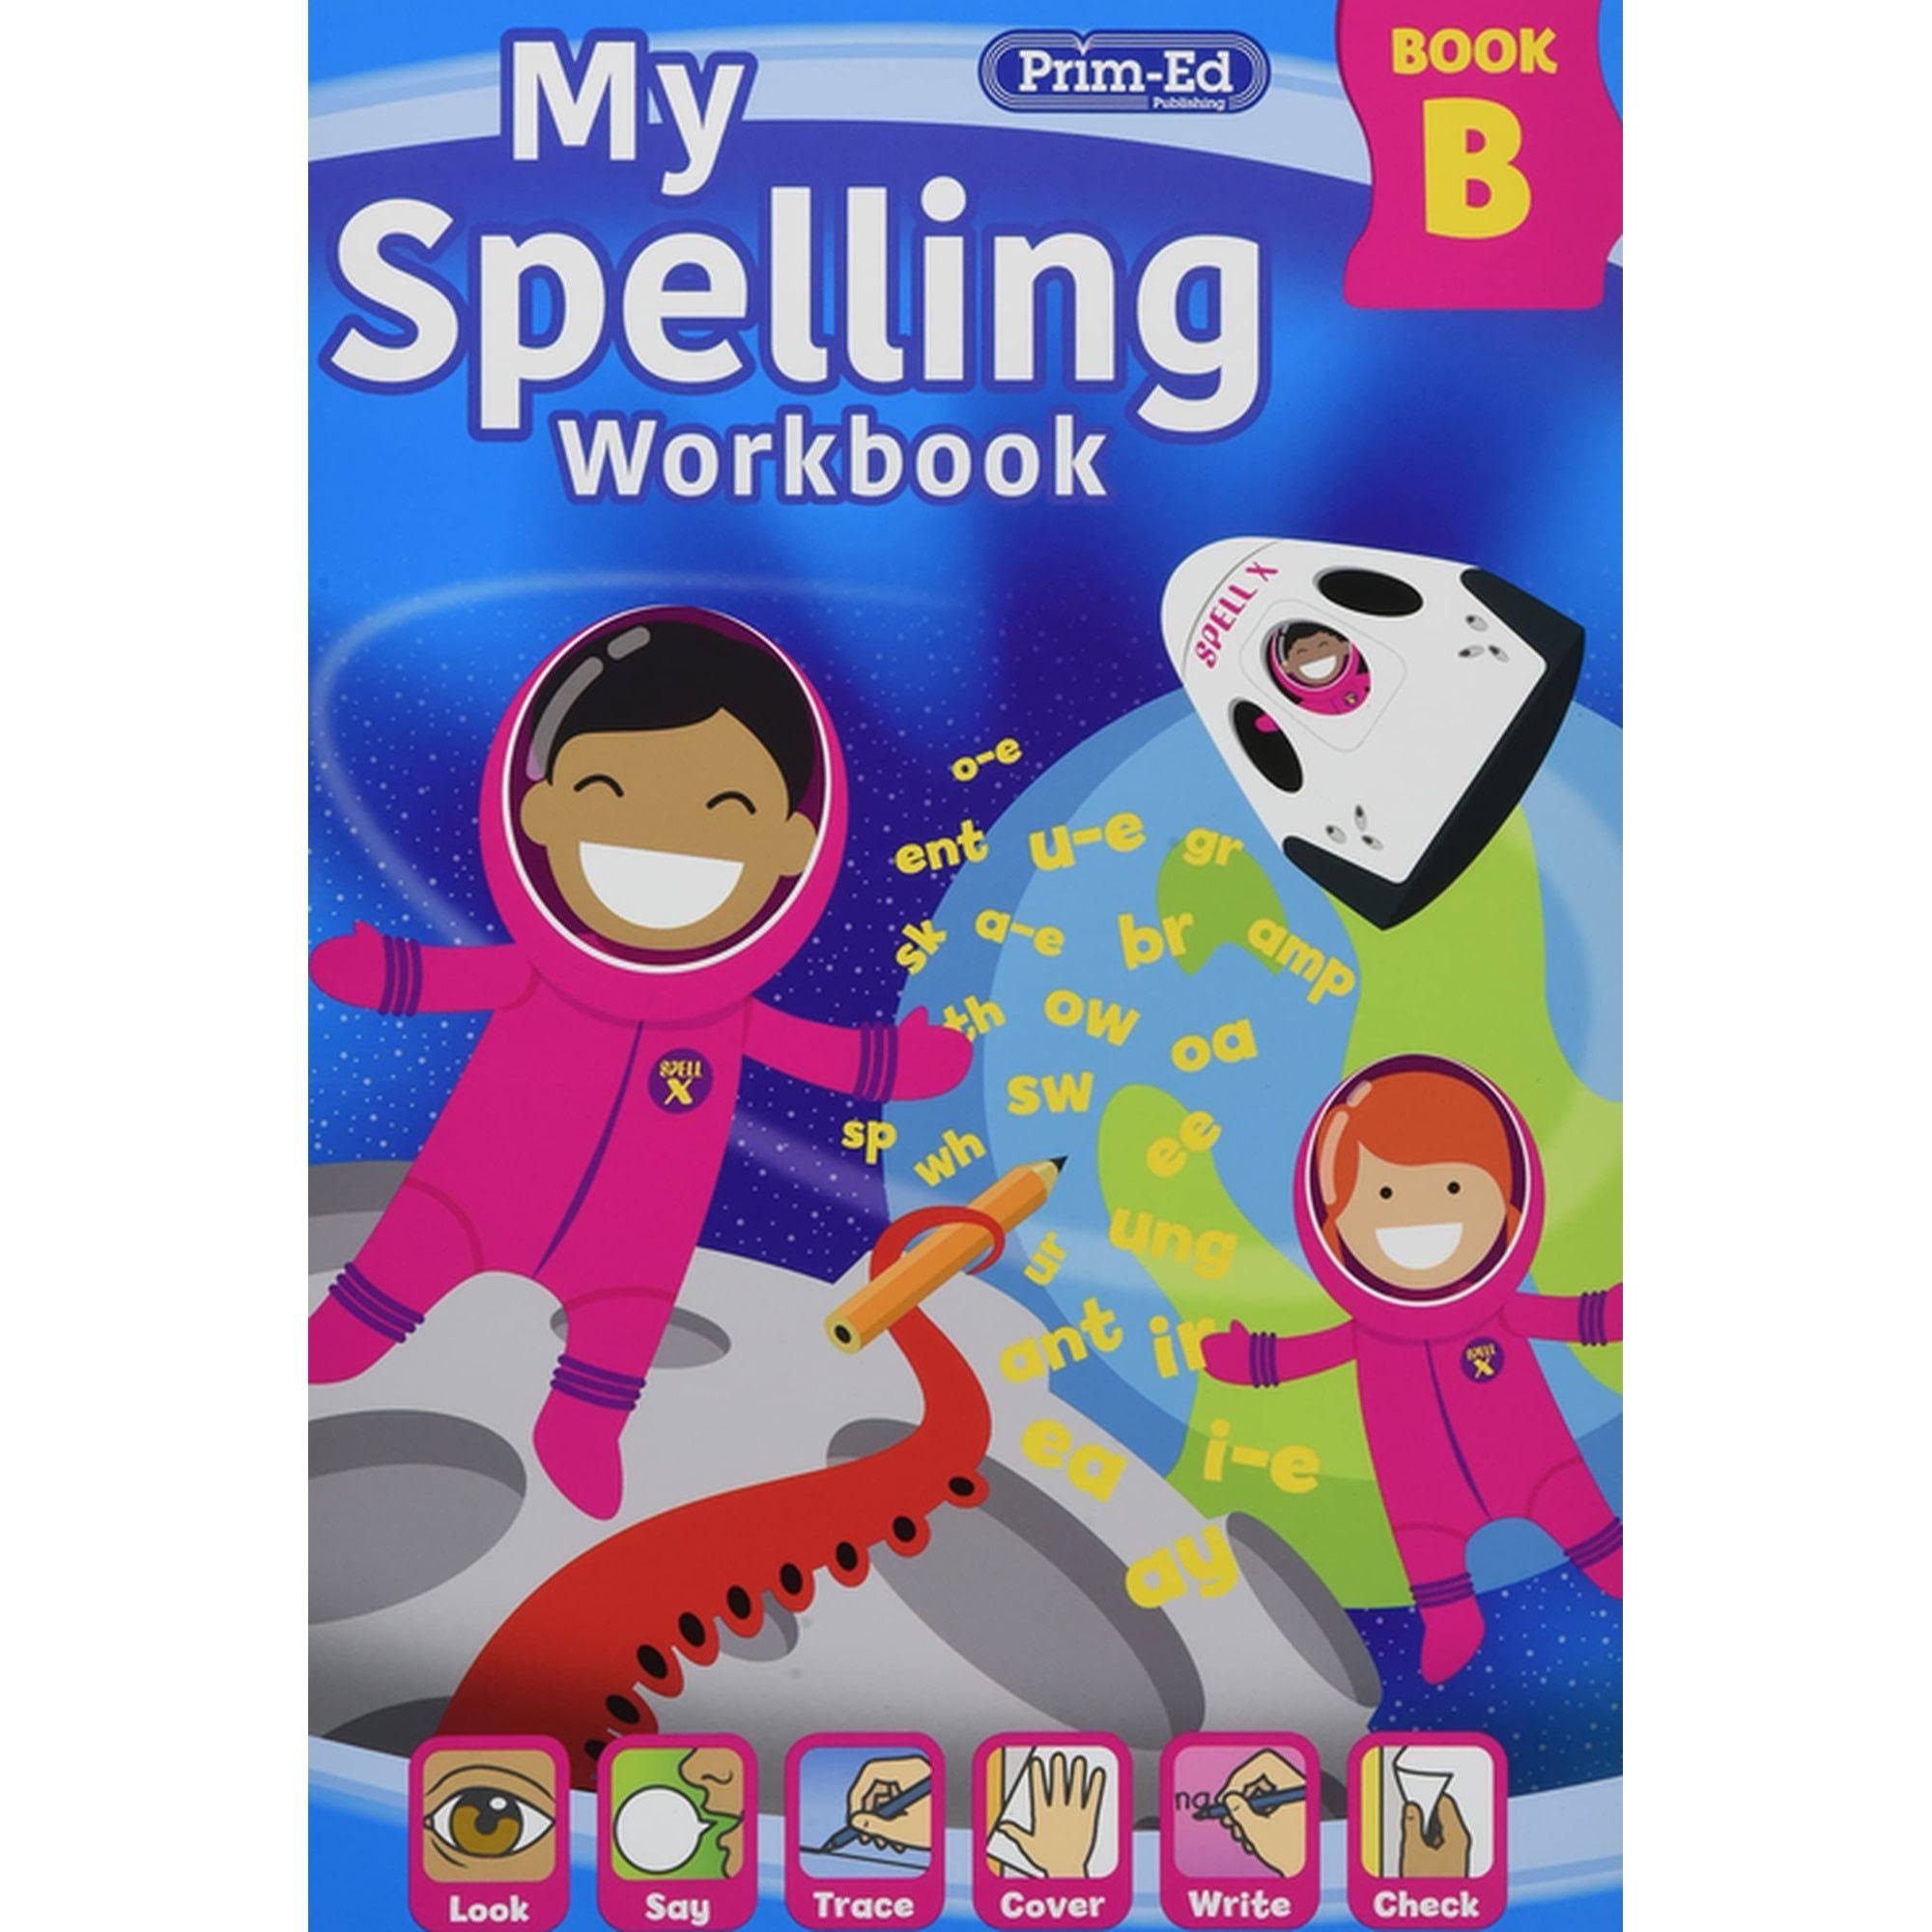 My Spelling Workbook Book B by RIC Publications